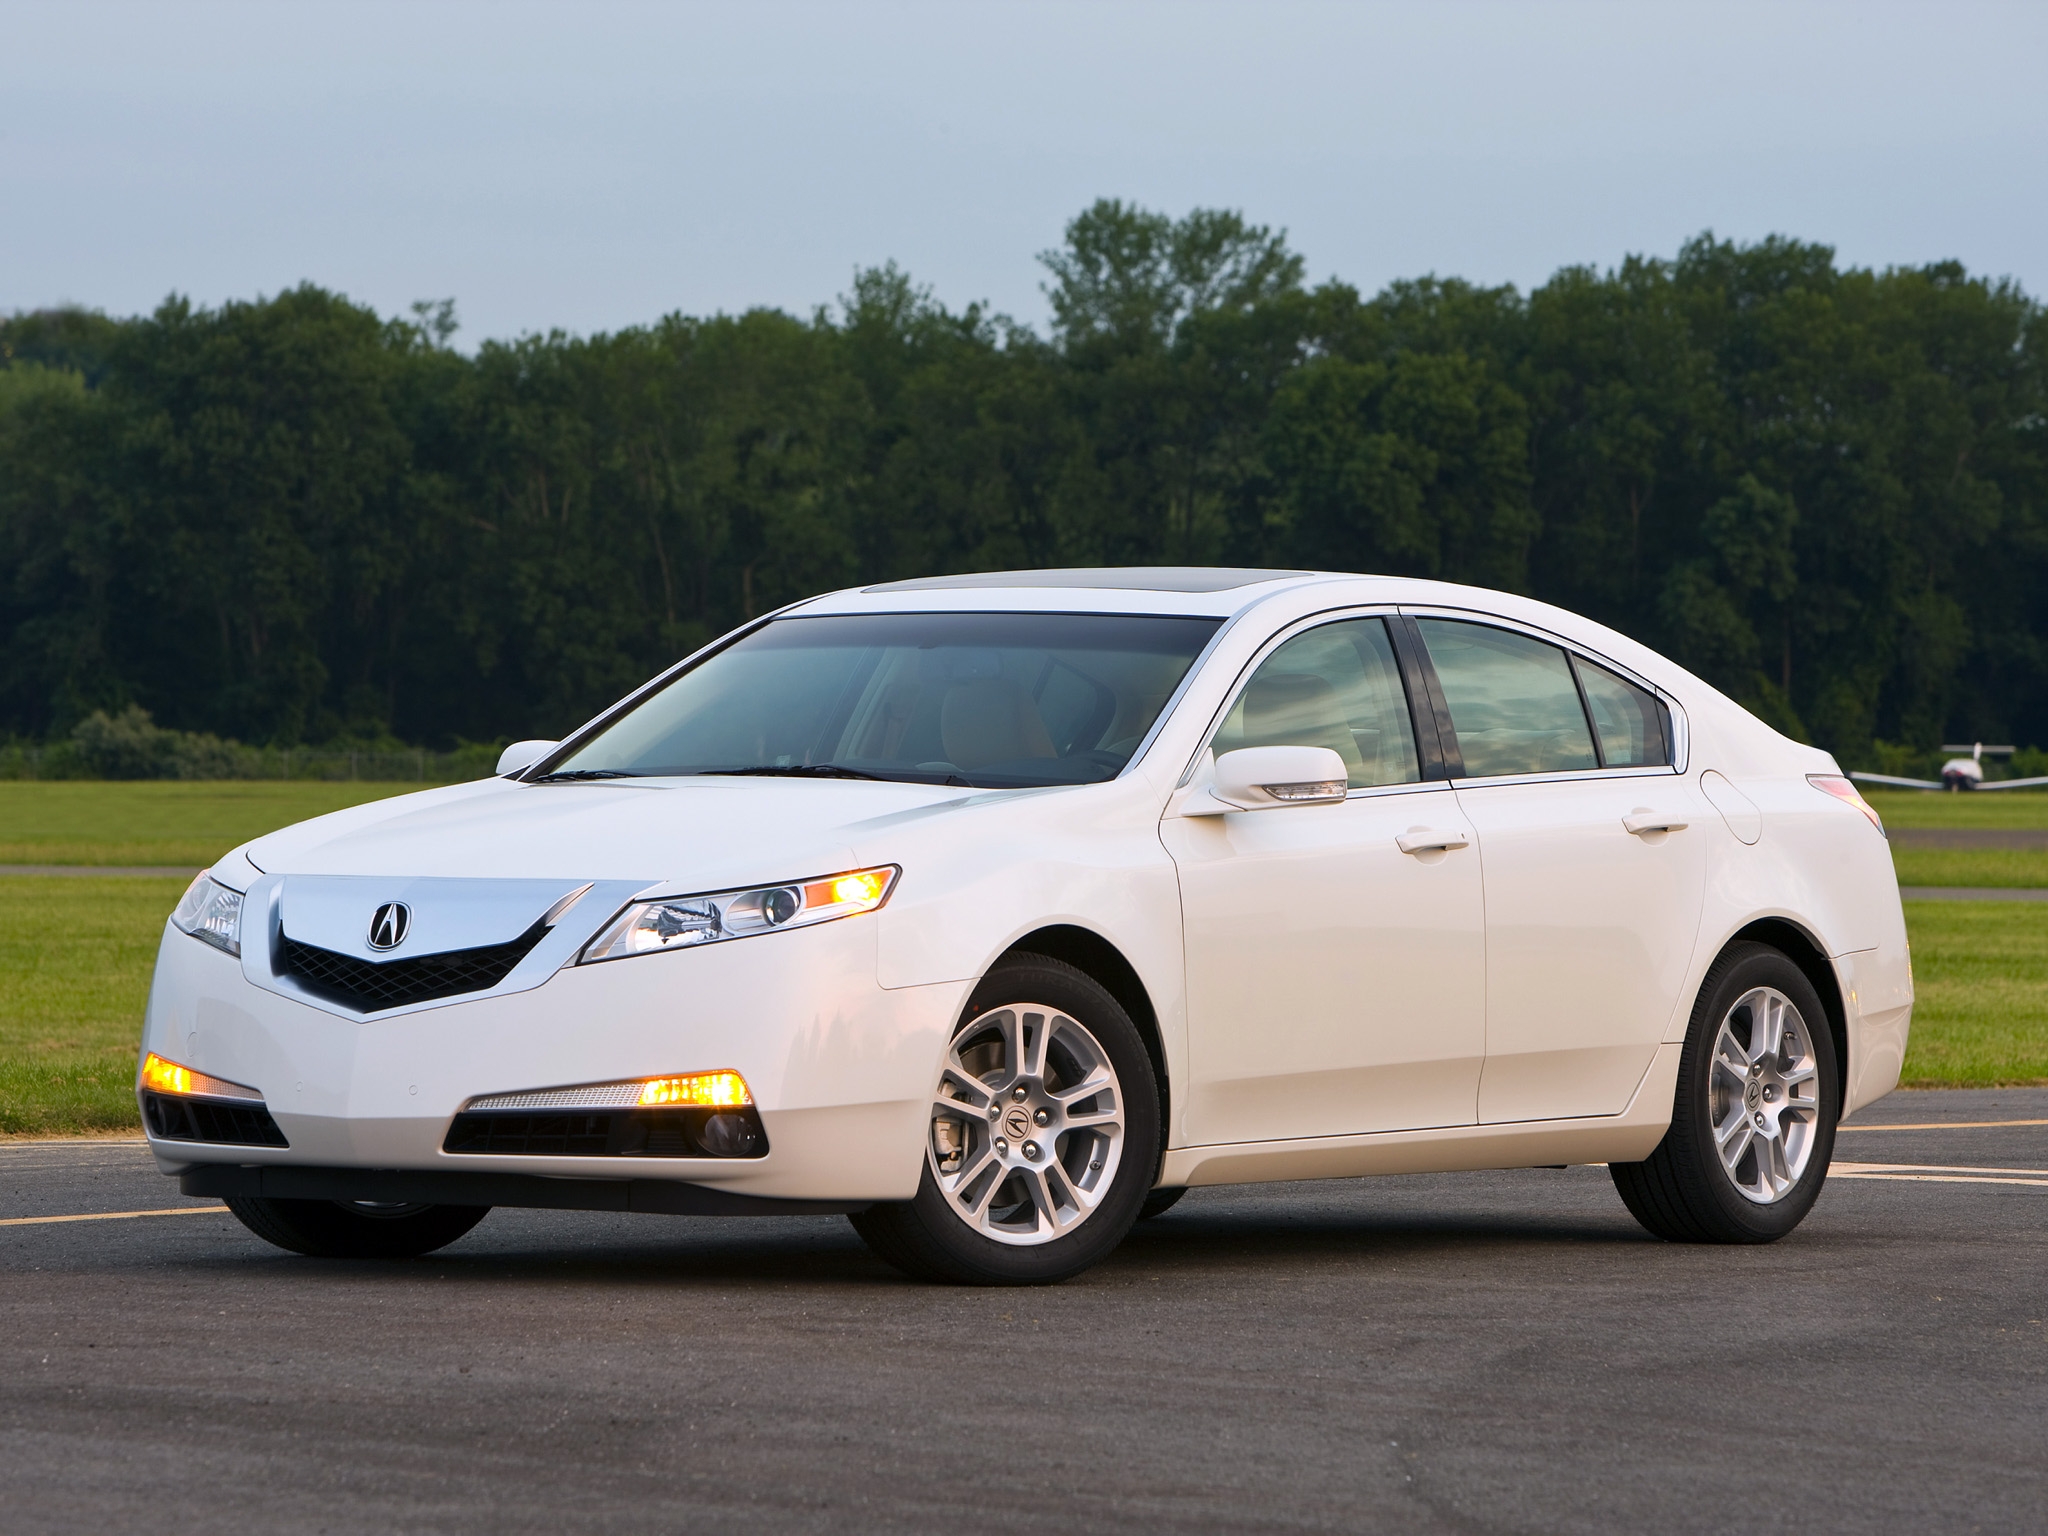 cars, auto, nature, trees, grass, acura, white, side view, style, akura, 2008, tl Full HD